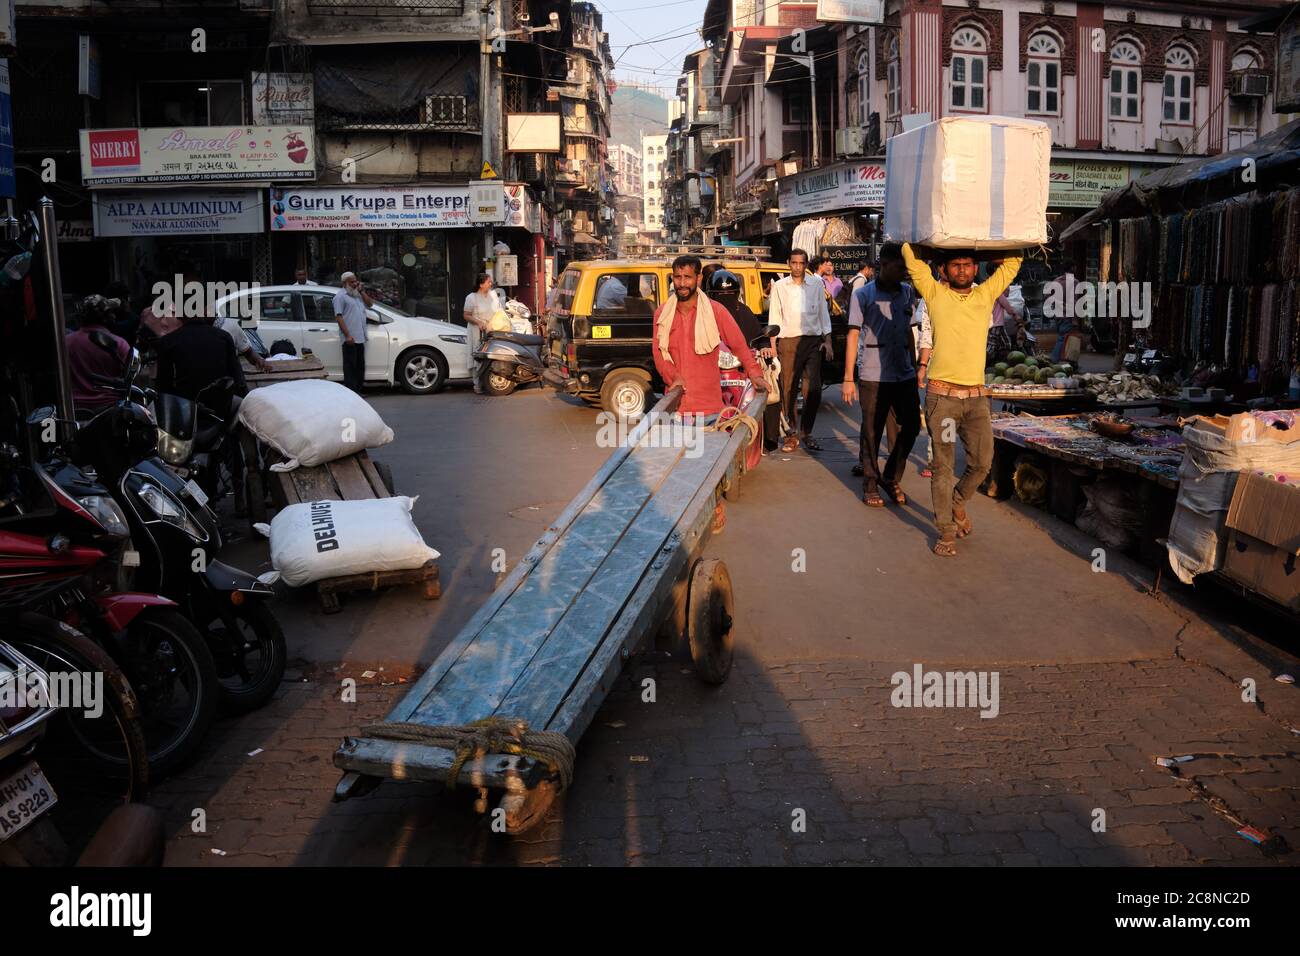 A man steers a handcart through busy Kalbadevi Rd. in Bhuleshwar, Mumbai, India, handcarts being the most used mode for goods transport in the area Stock Photo